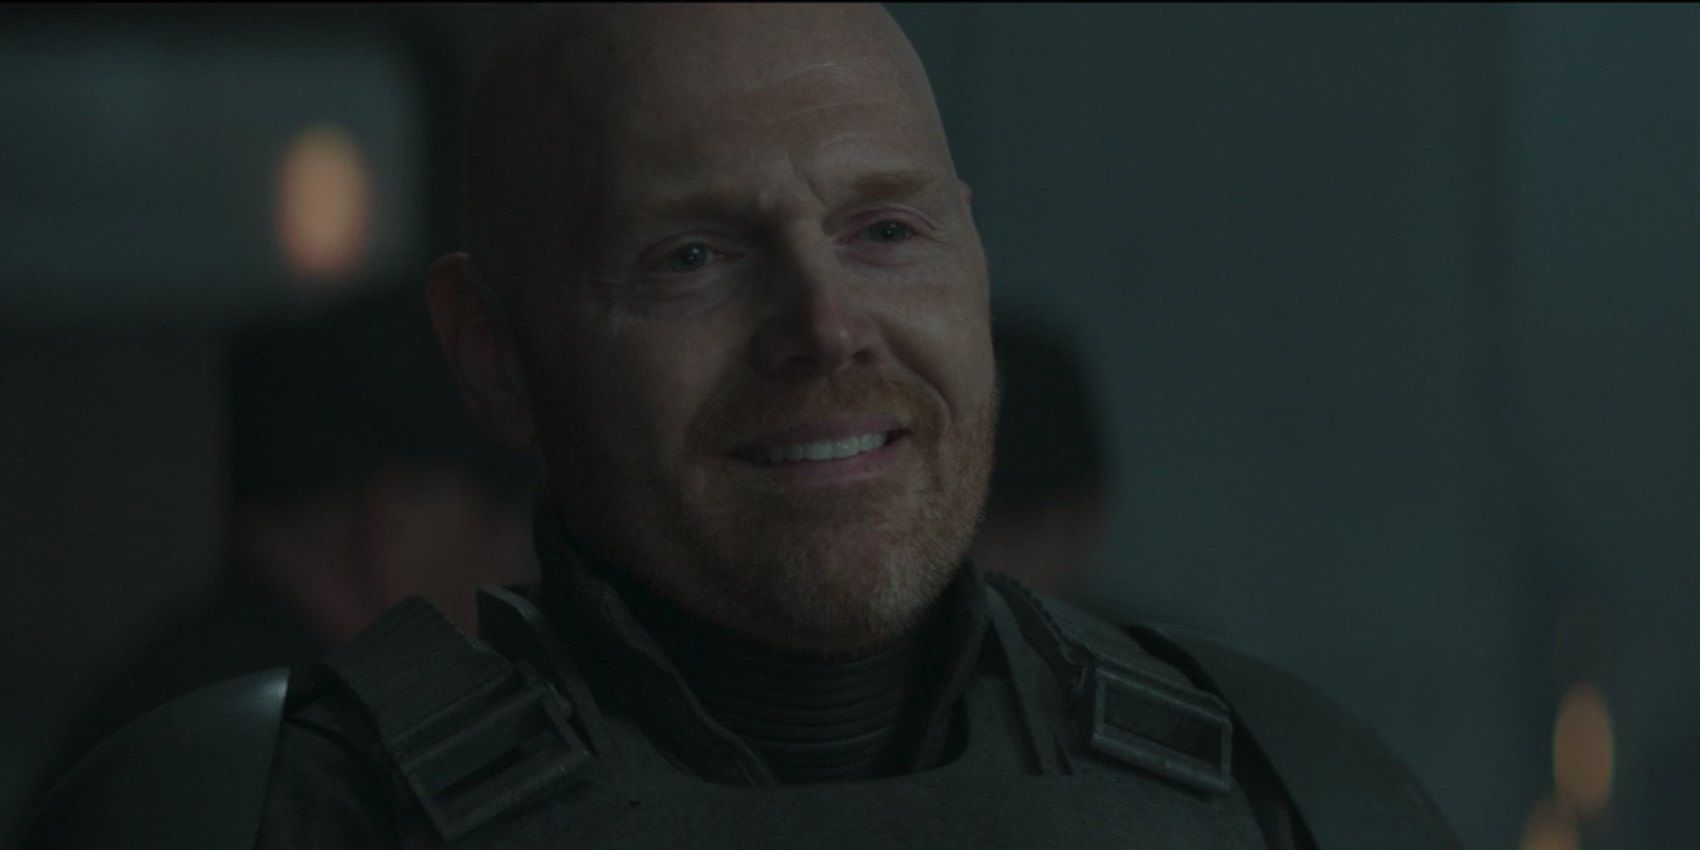 Bill Burr as Migs Mayfeld at an Imperial outpost in The Mandalorian